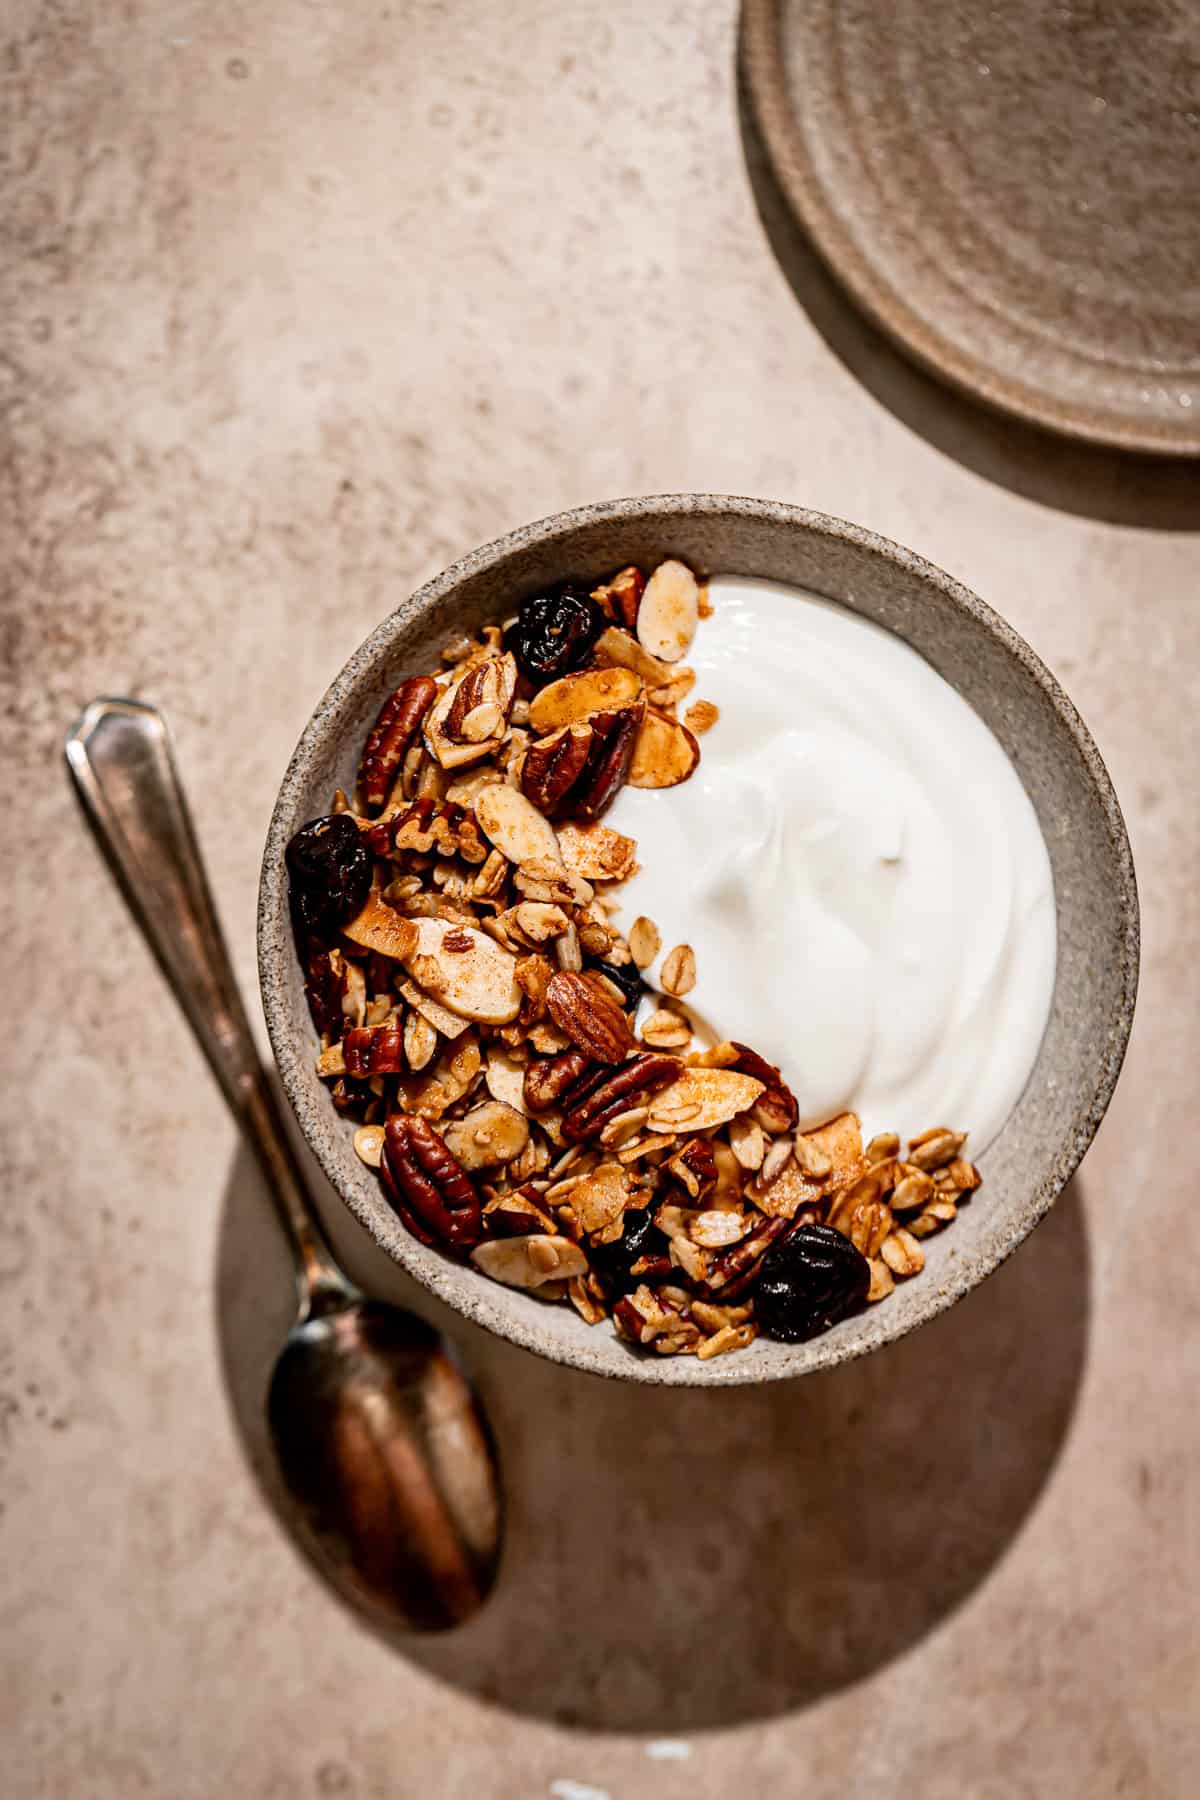 maple nut granola in a bowl of yogurt on a beige background with a spoon resting by the bowl.